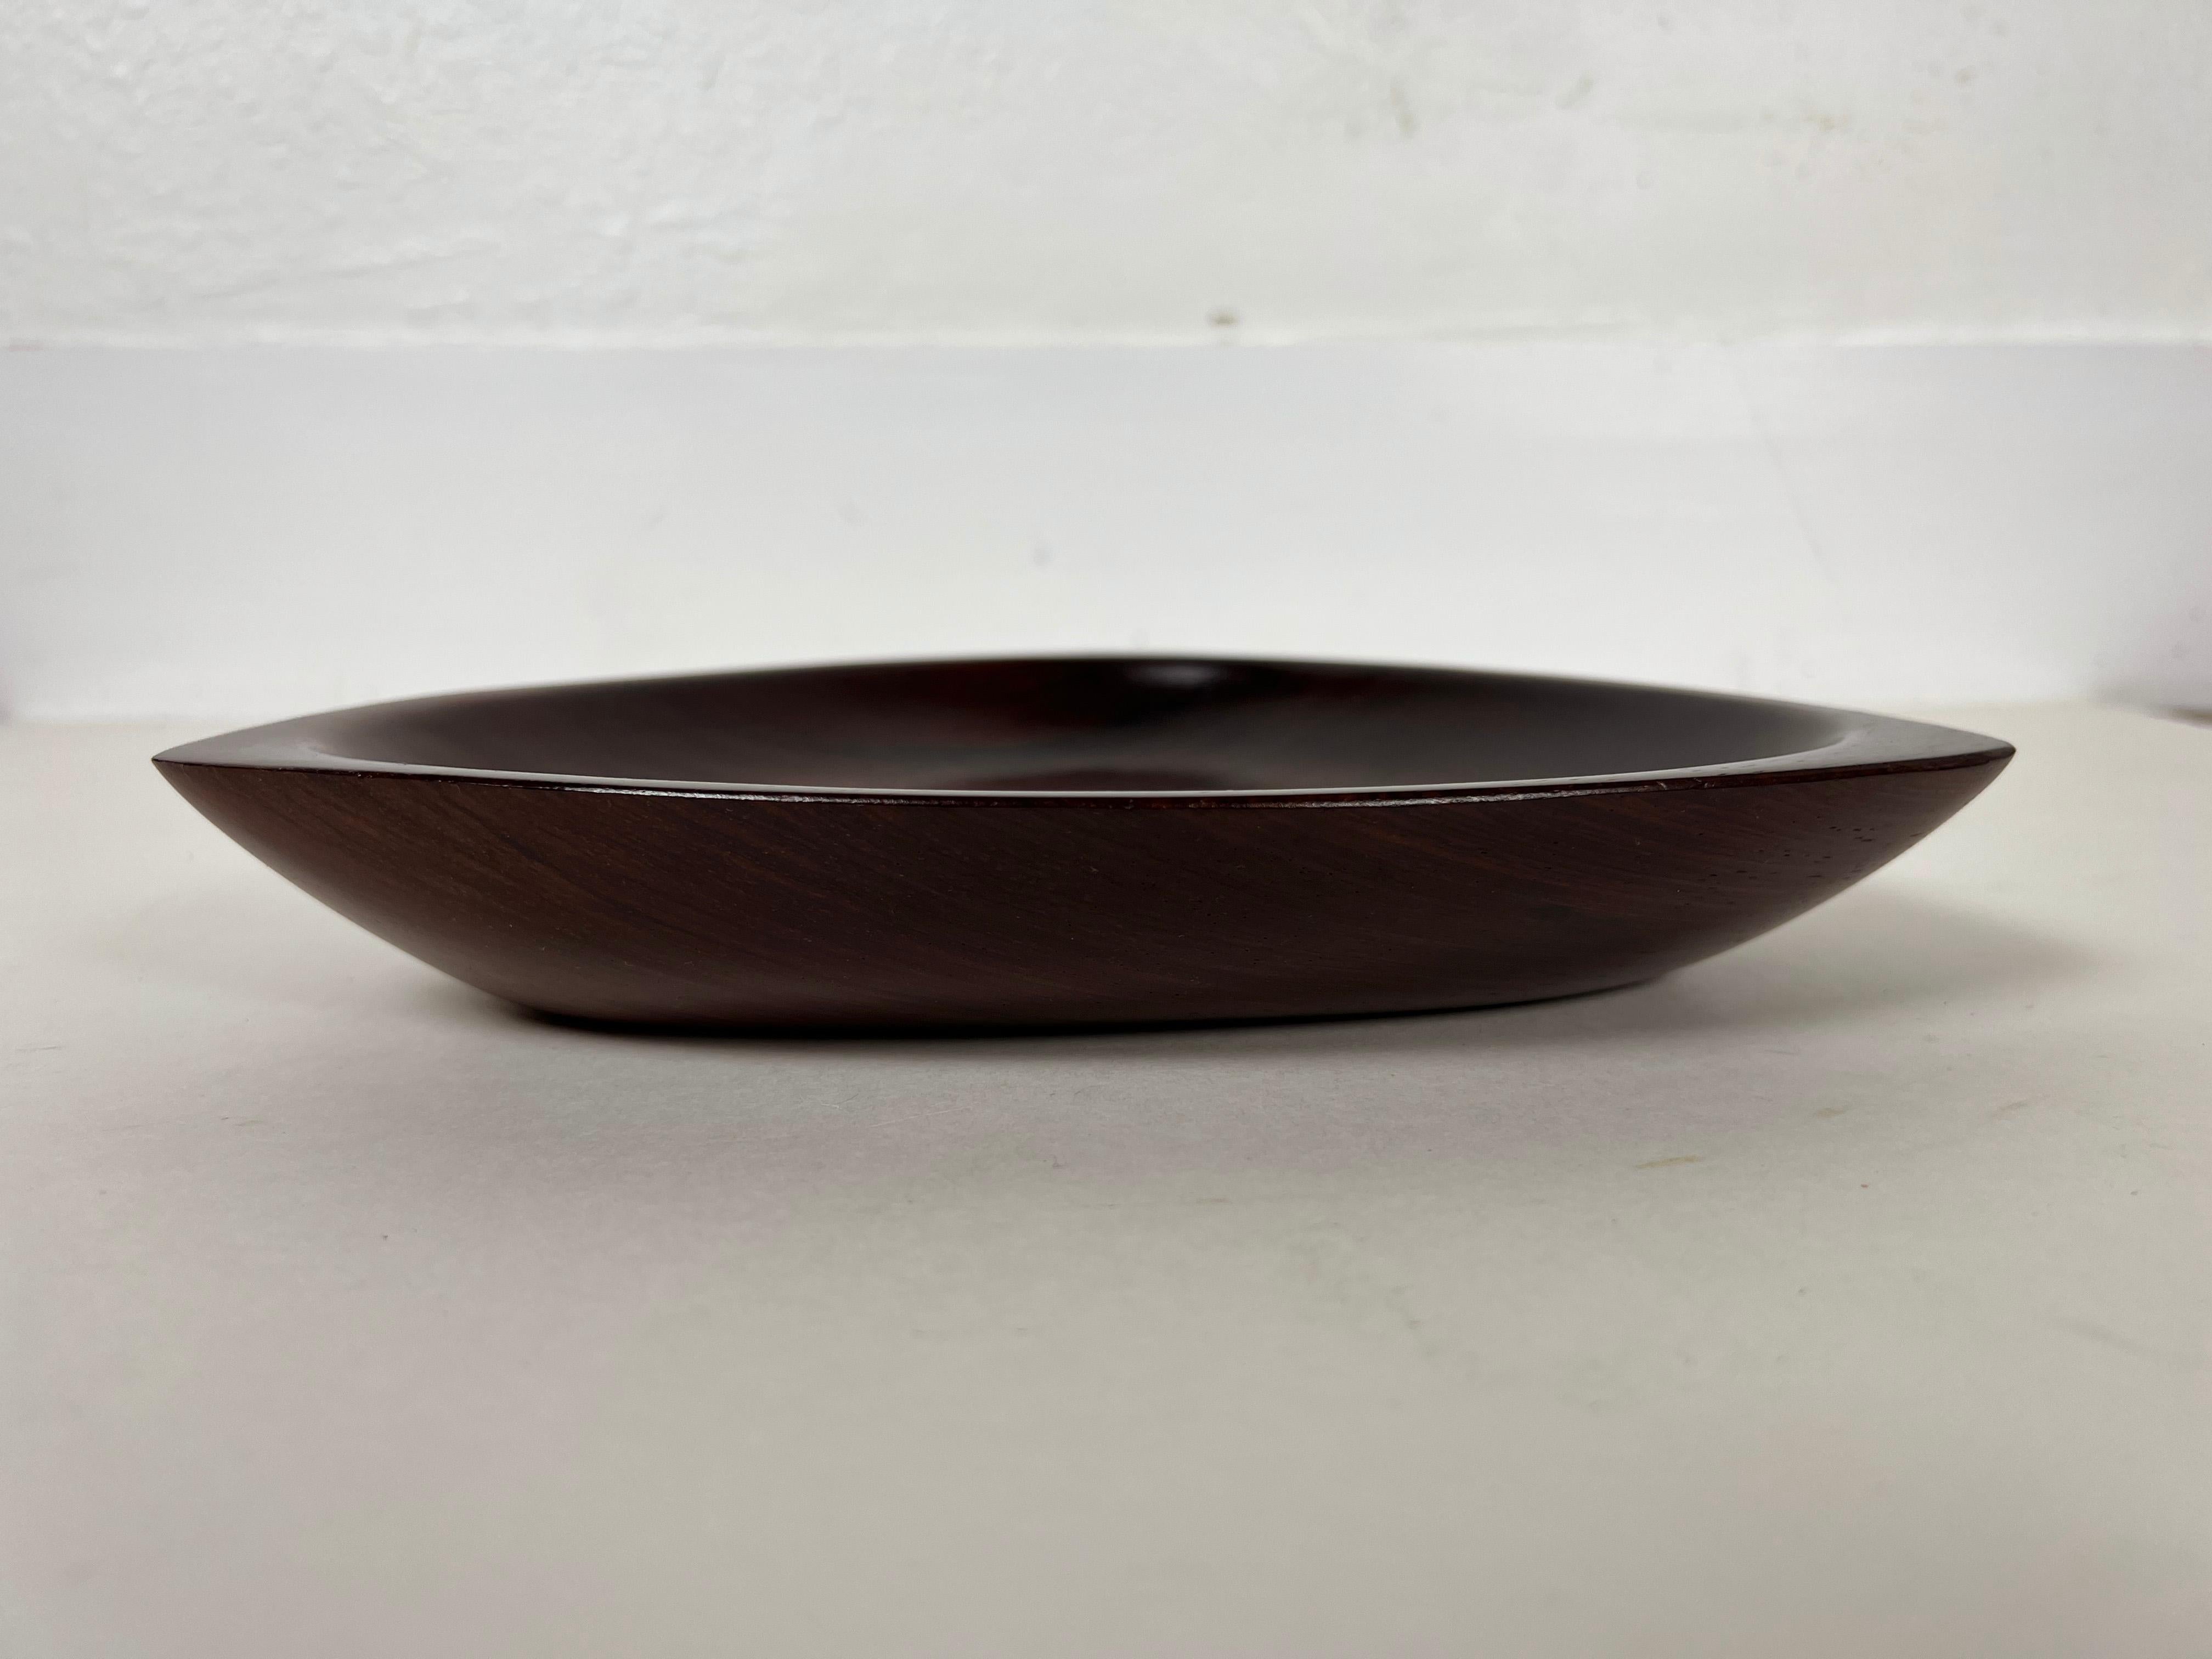 Brazilian Jacaranda Rosewood Bowl by Jac-Arte In Excellent Condition For Sale In Fort Lauderdale, FL